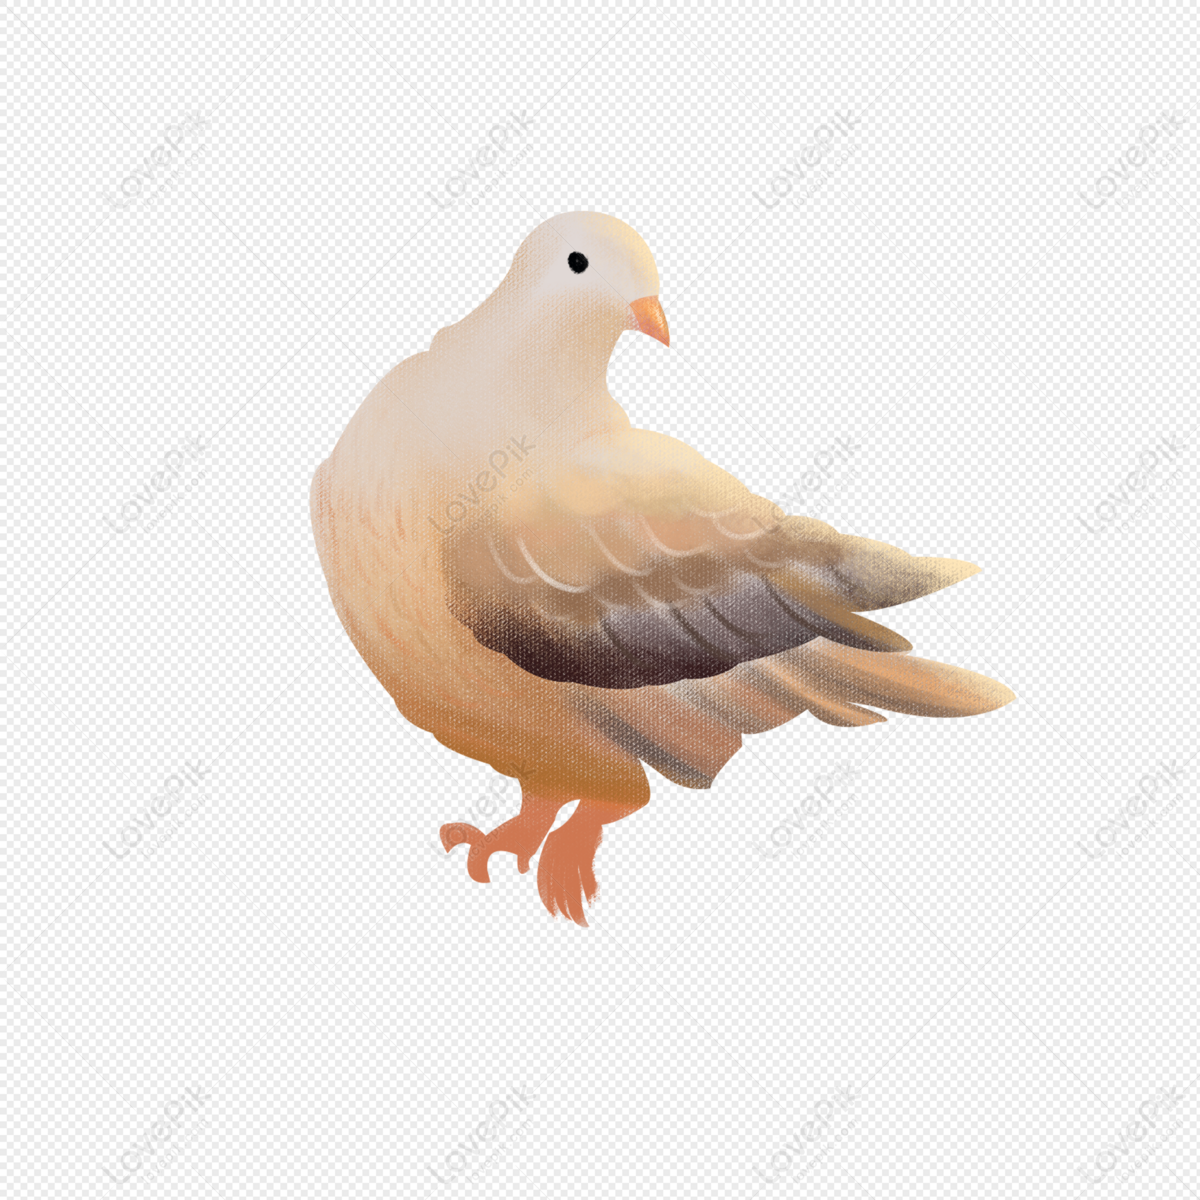 Pigeon PNG Image Free Download And Clipart Image For Free Download -  Lovepik | 401531551